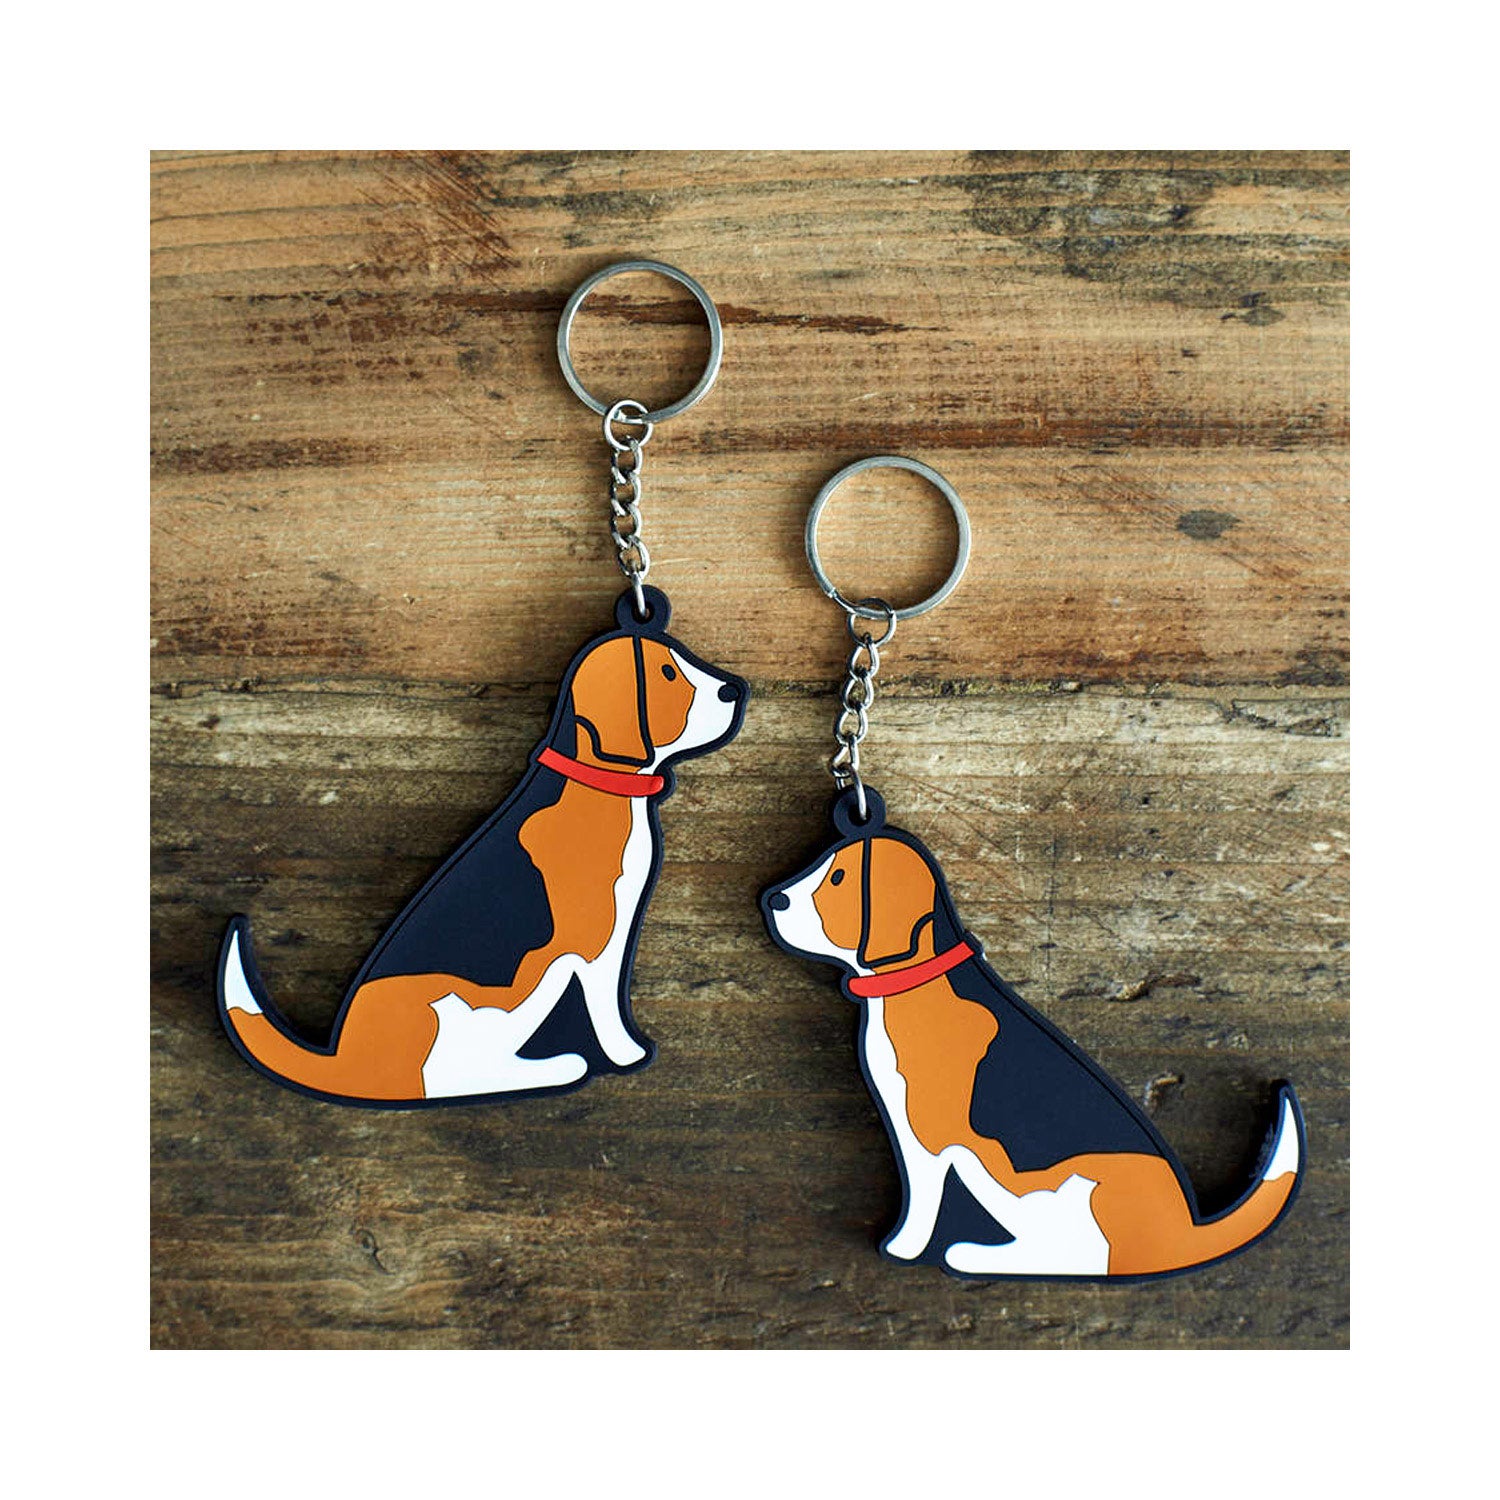 Dog Lover Gifts available at DogKrazyGifts - Rupert The Beagle Keyring - part of the Sweet William range available from Dog Krazy Gifts